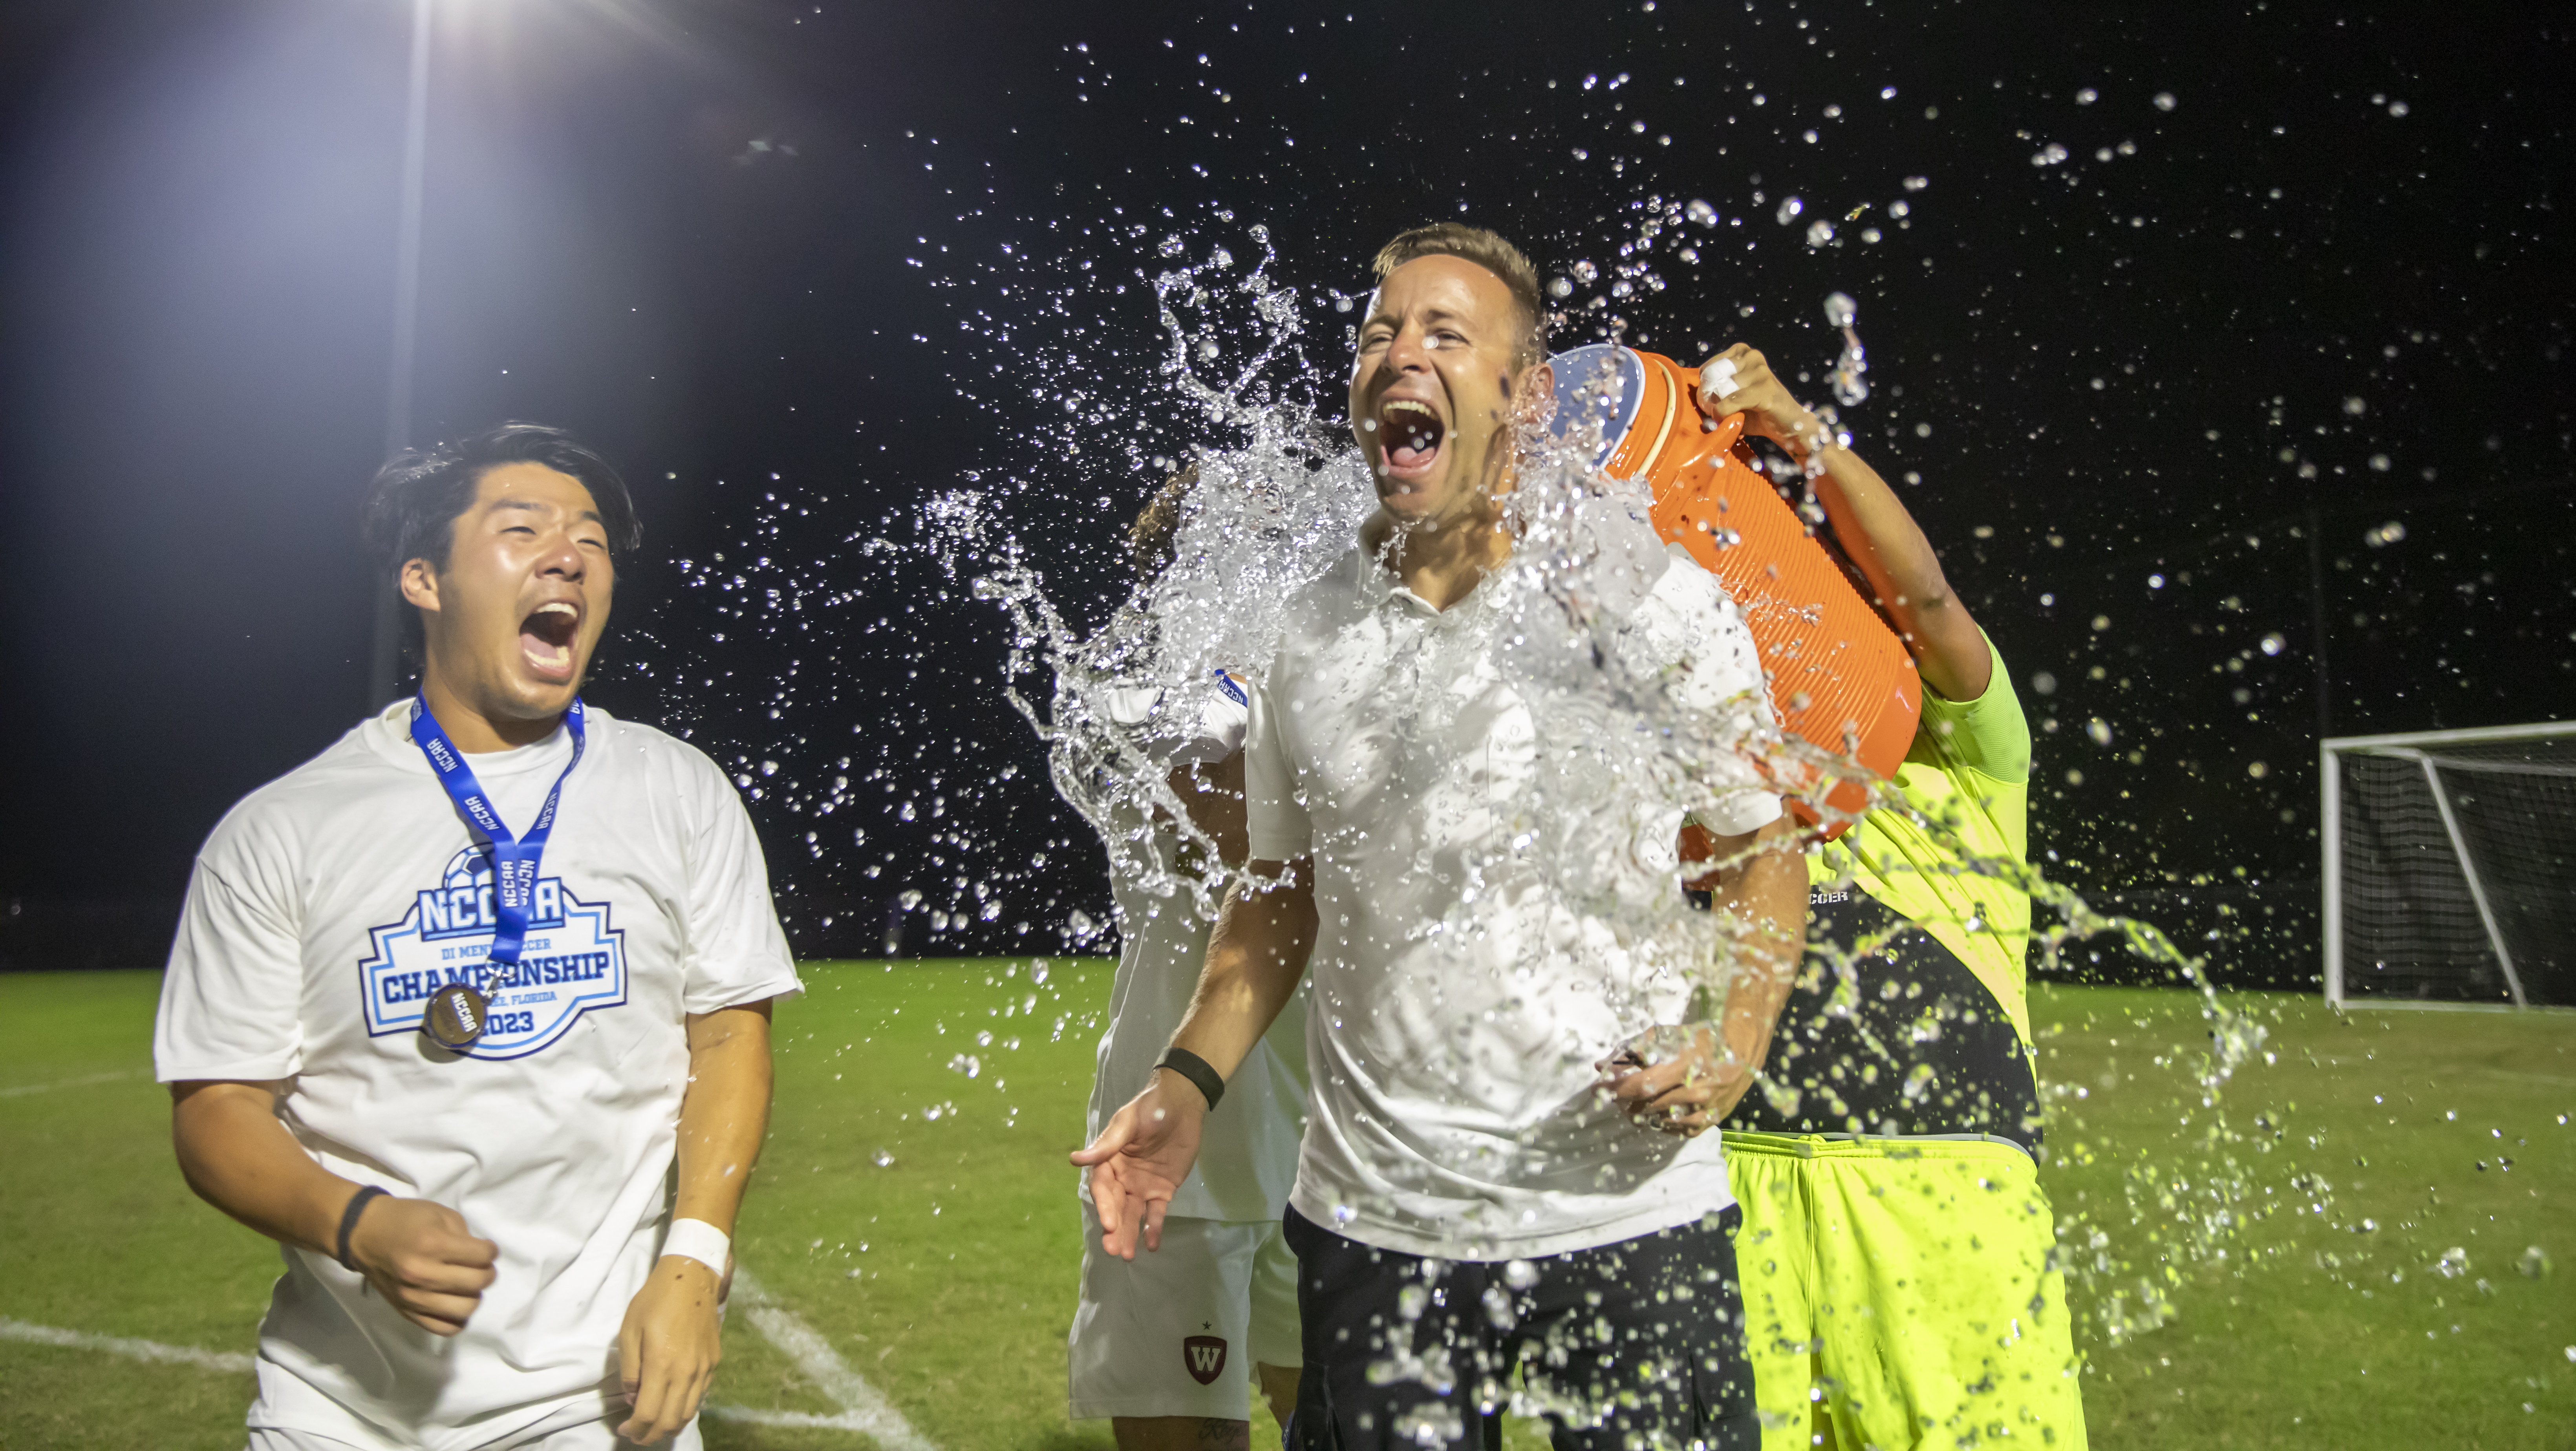 men's soccer water poured on player in celebration